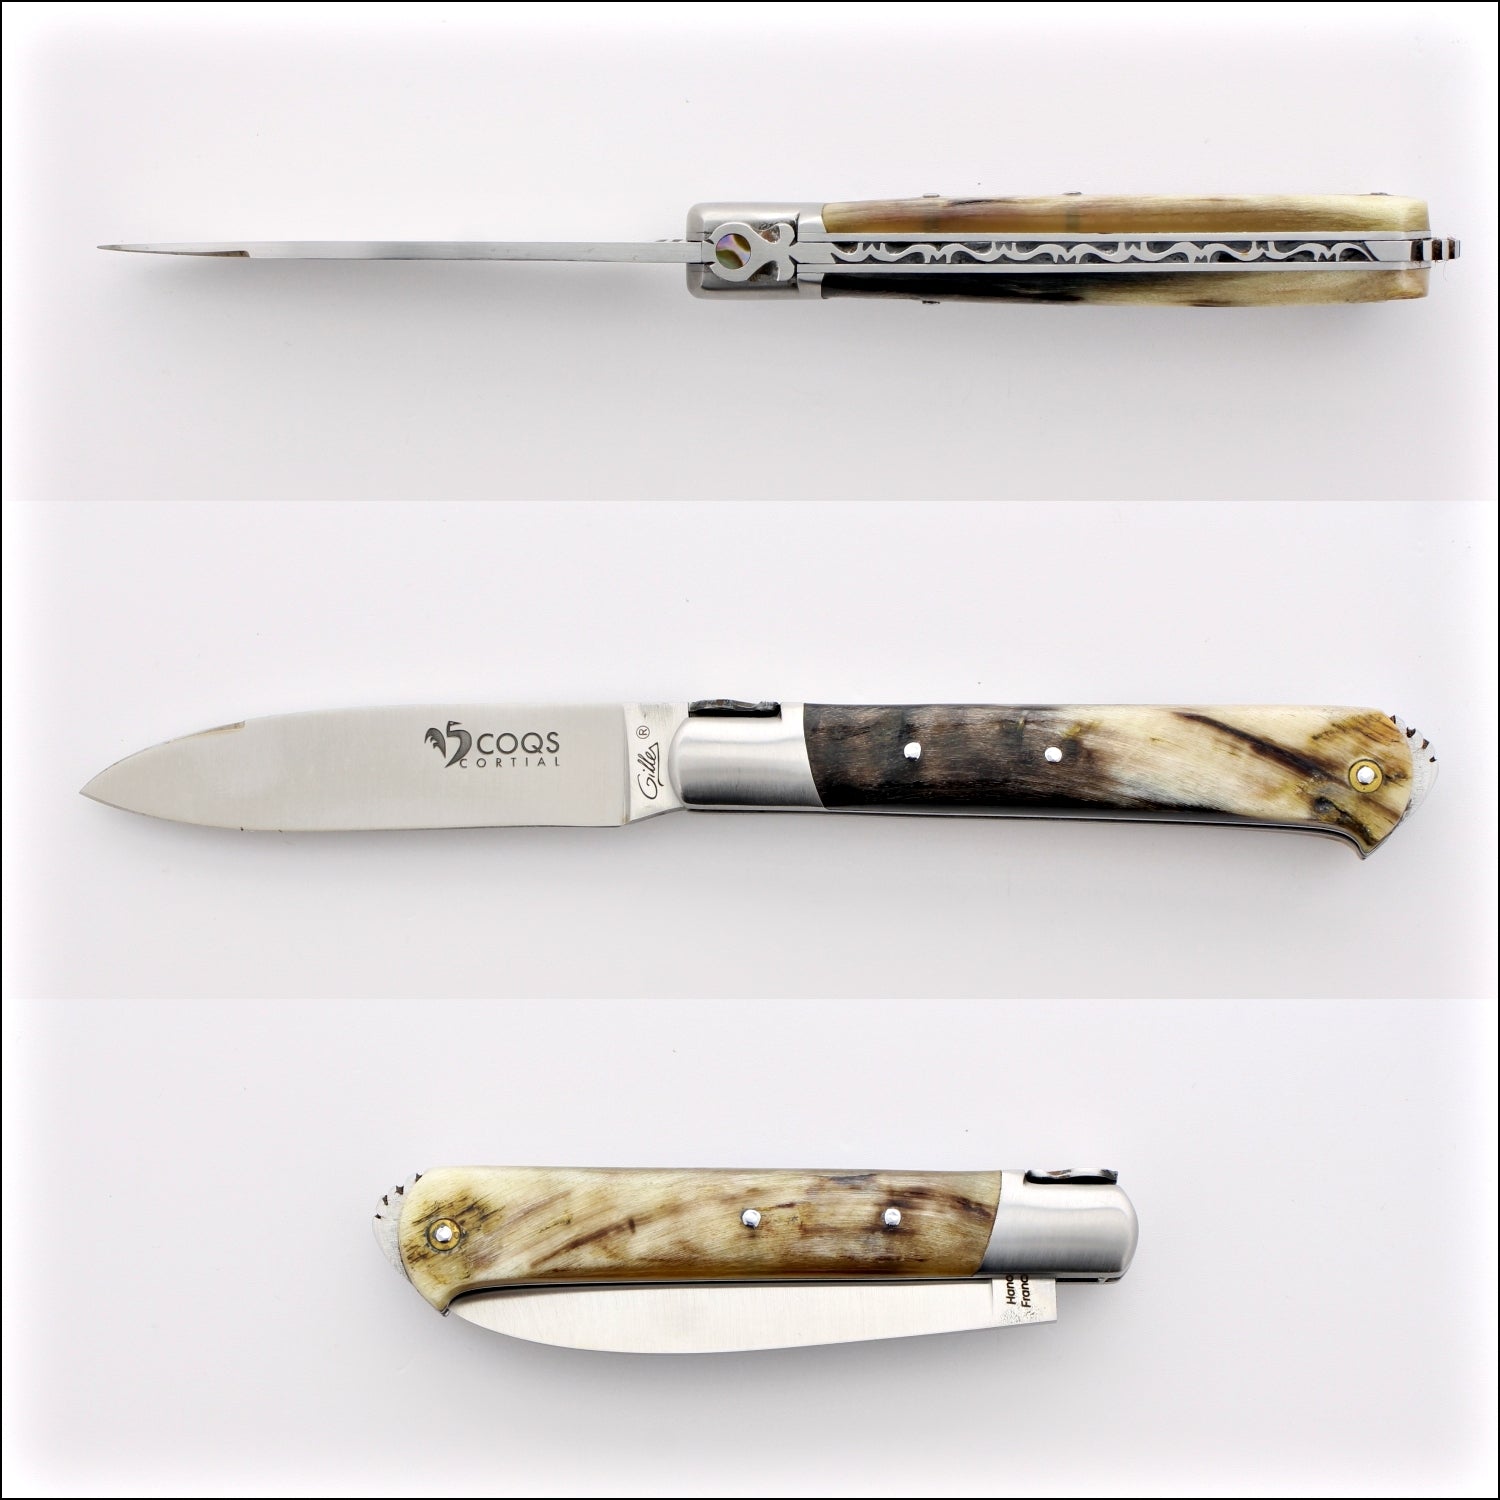 5 Coqs Pocket Knife - Dark Ram Horn & Mother of Pearl Inlay